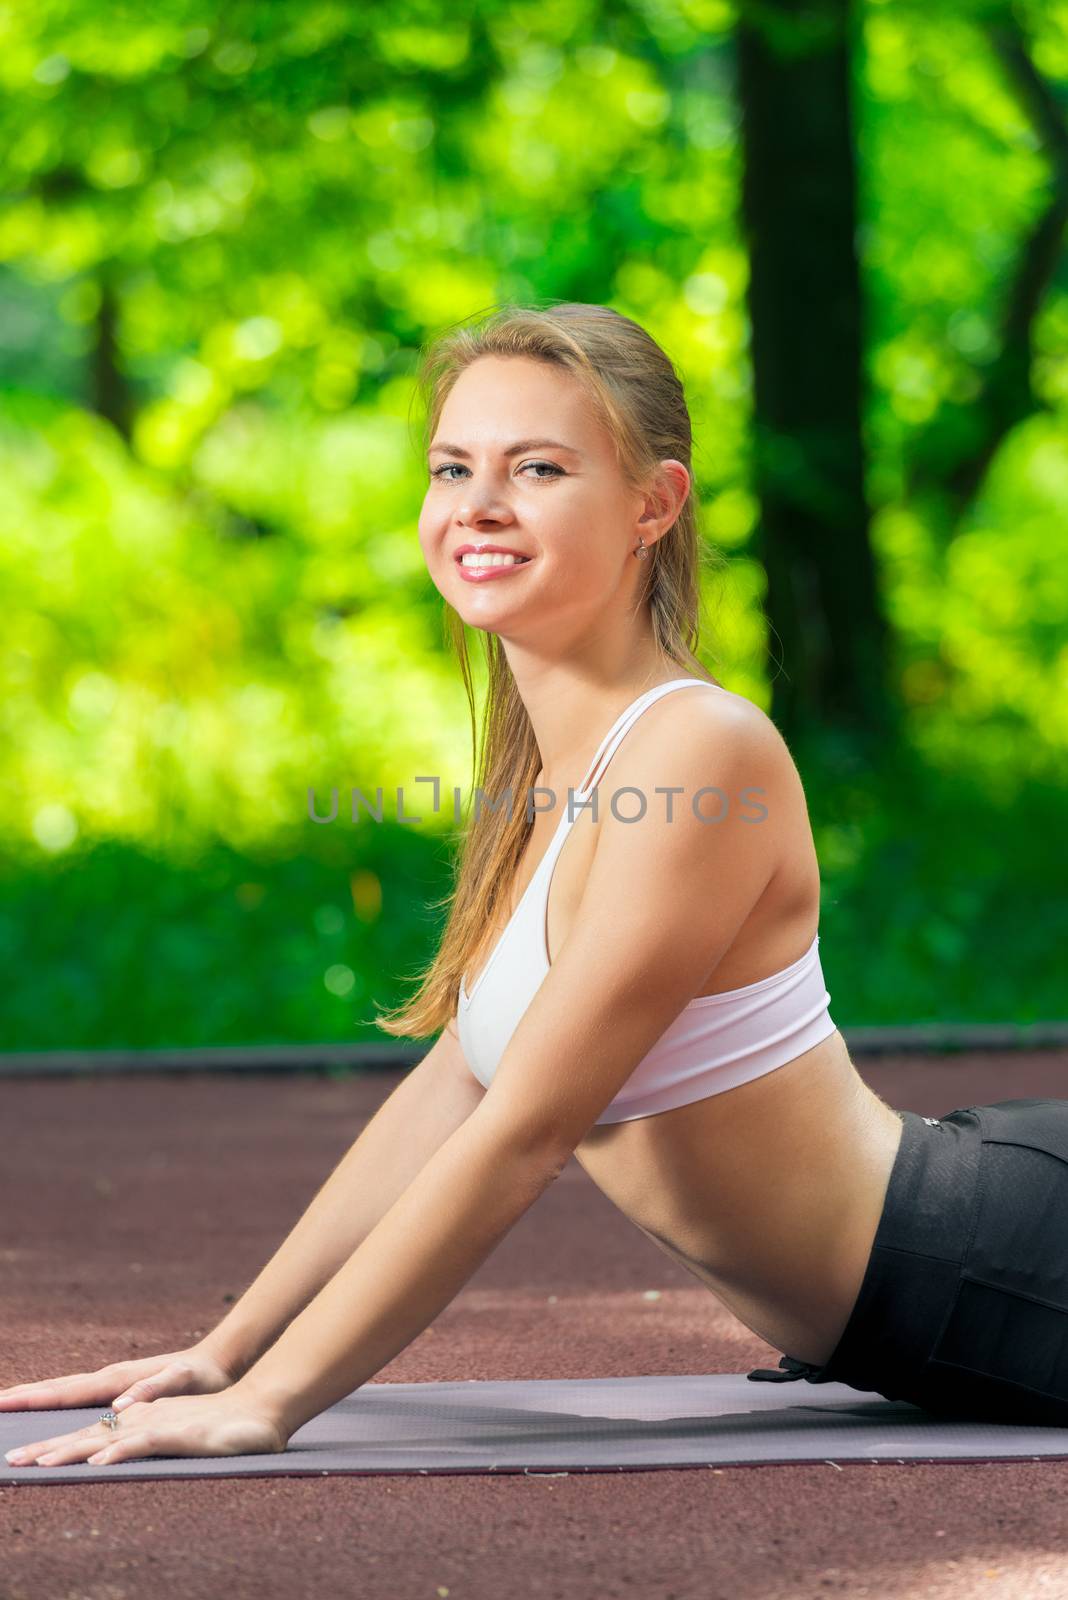 woman doing stretching exercises in the park in the fresh air